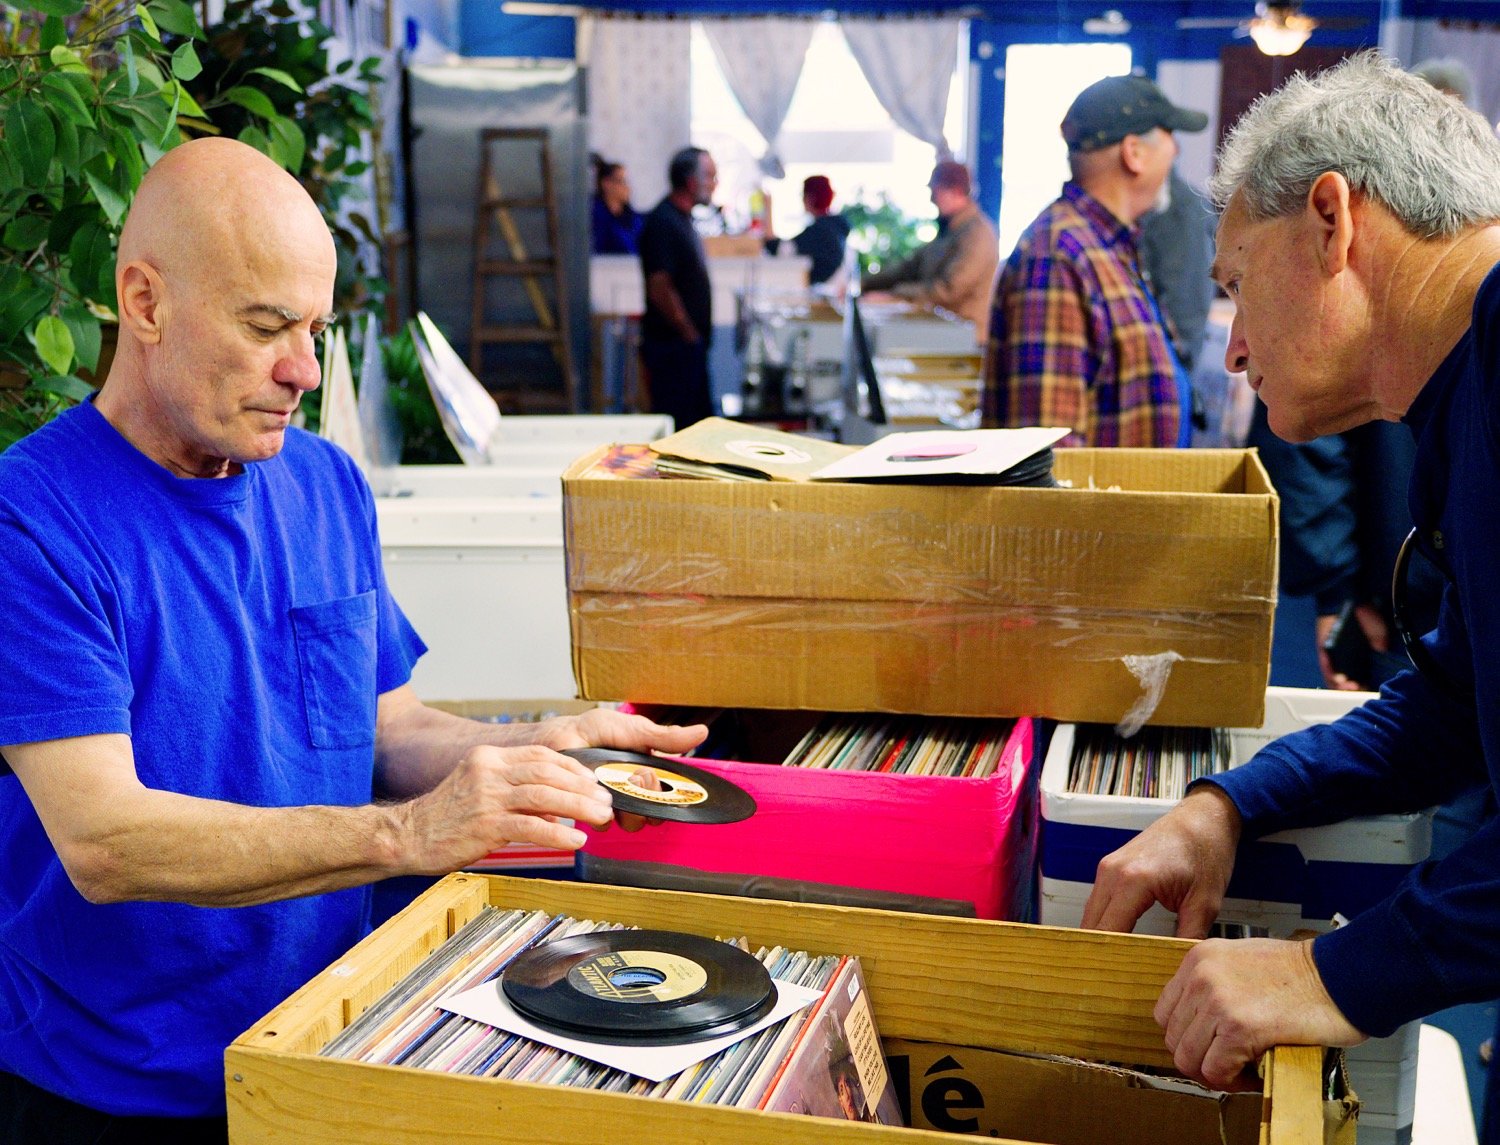 Jim Allen describes the cleaning process for a 45 RPM record to Michael Maddox at Saturday’s vinyl record show. [get more grooves]